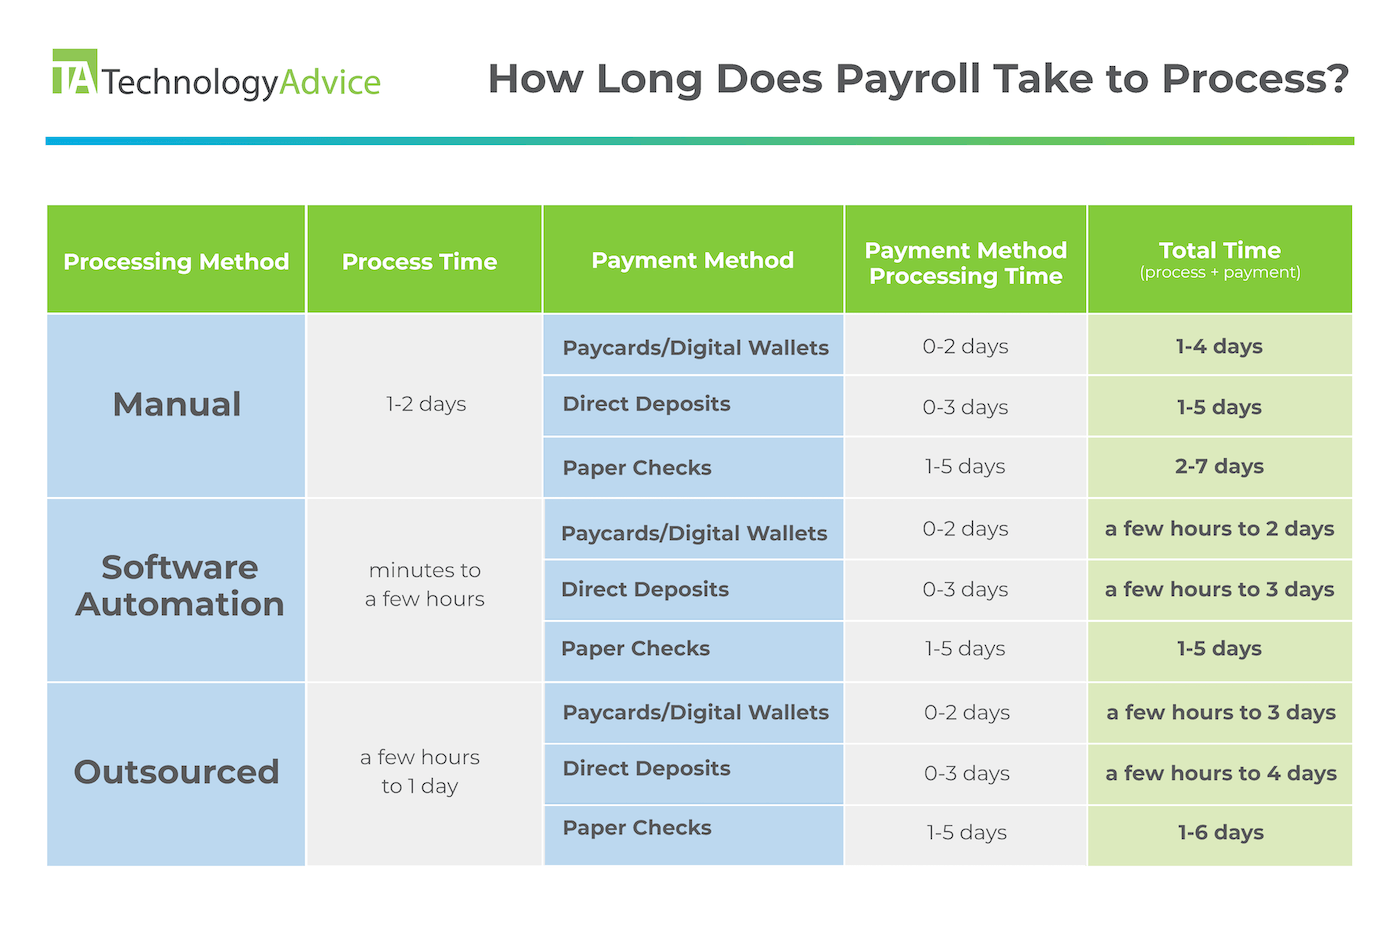 Comparison table for payroll processing times. Base duration depends on the processing method: Manual (1–2 days); software automation (<a few hours); or outsourcing (<1 day). Different payment methods may add processing time: Paycards and digital wallets (<2 days); direct deposits (<3 days); or paper checks (1–5 days).